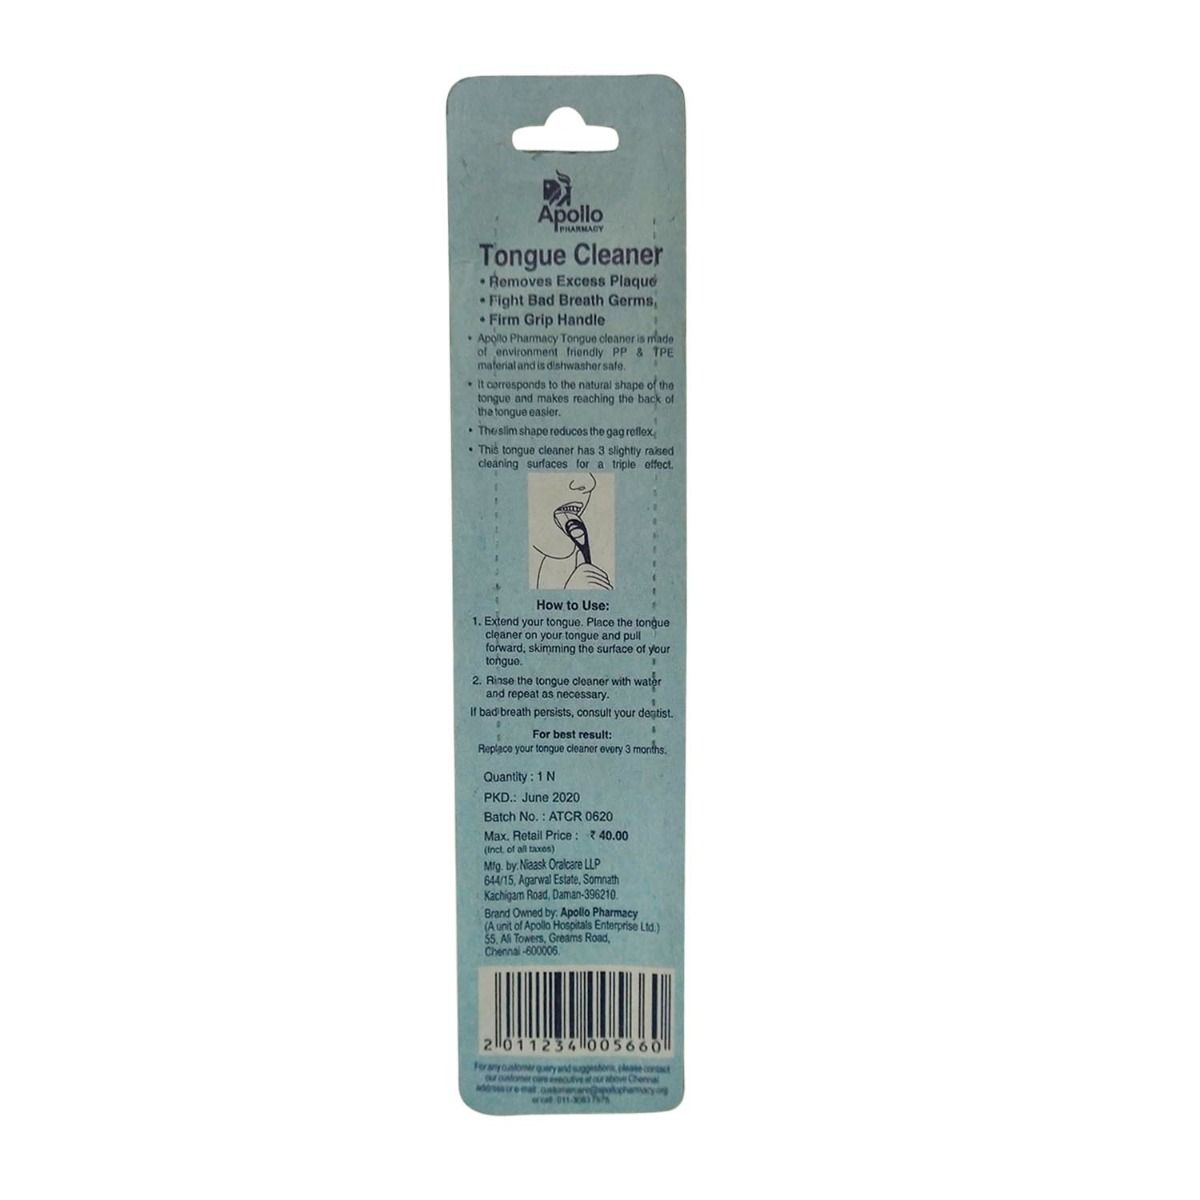 Apollo Pharmacy Tongue Cleaner, 1 Count, Pack of 1 